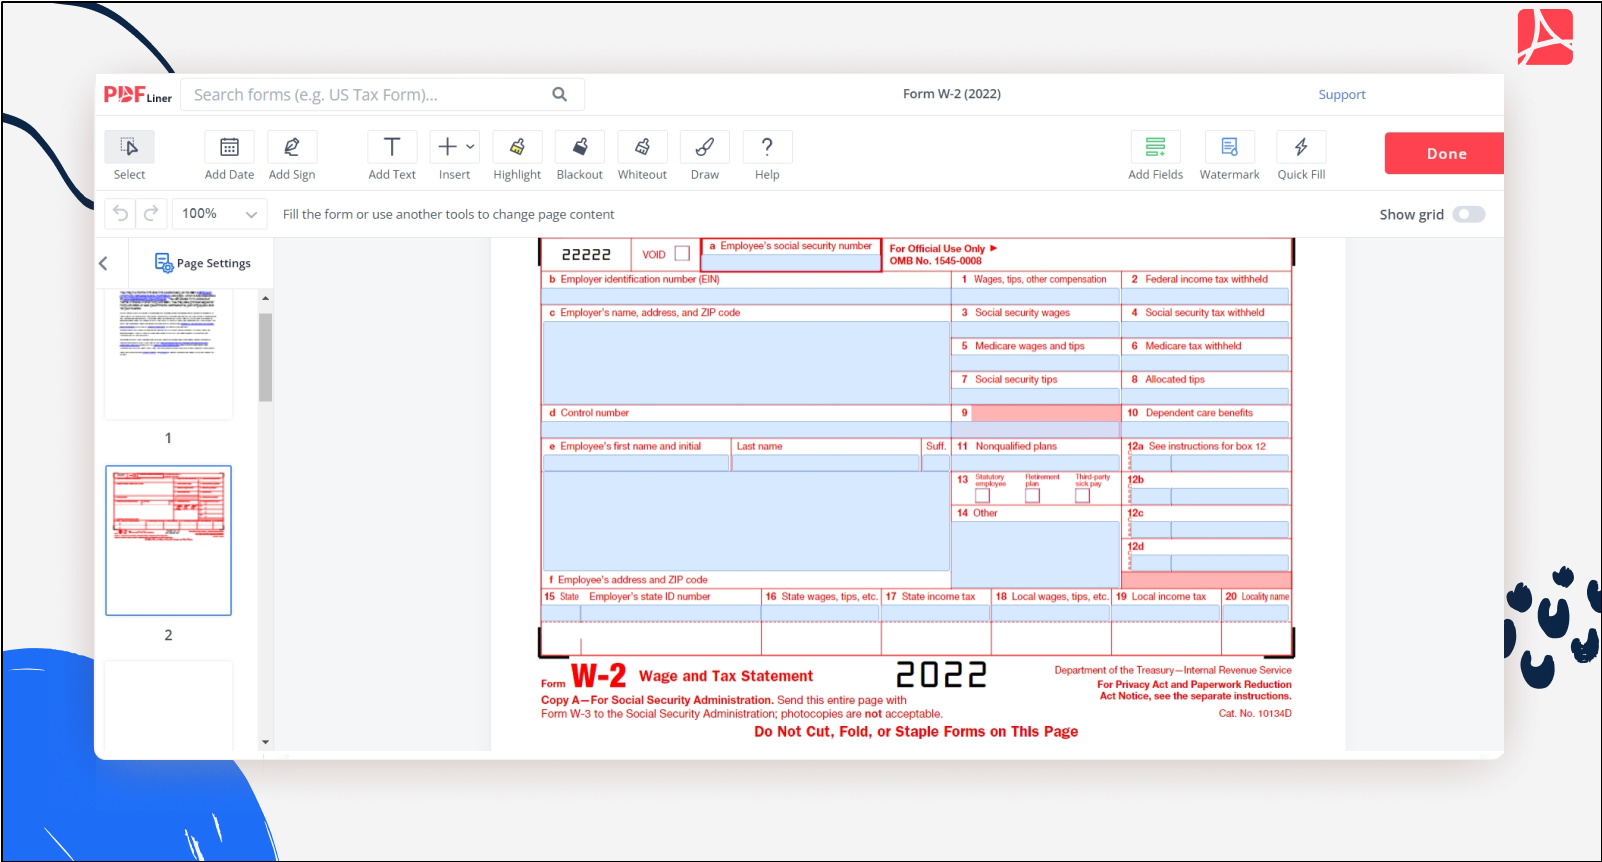 Form W-2 (2022): Printable Form W-2, Sign Forms Online | Pdfliner within 2022 W2 Fillable Form